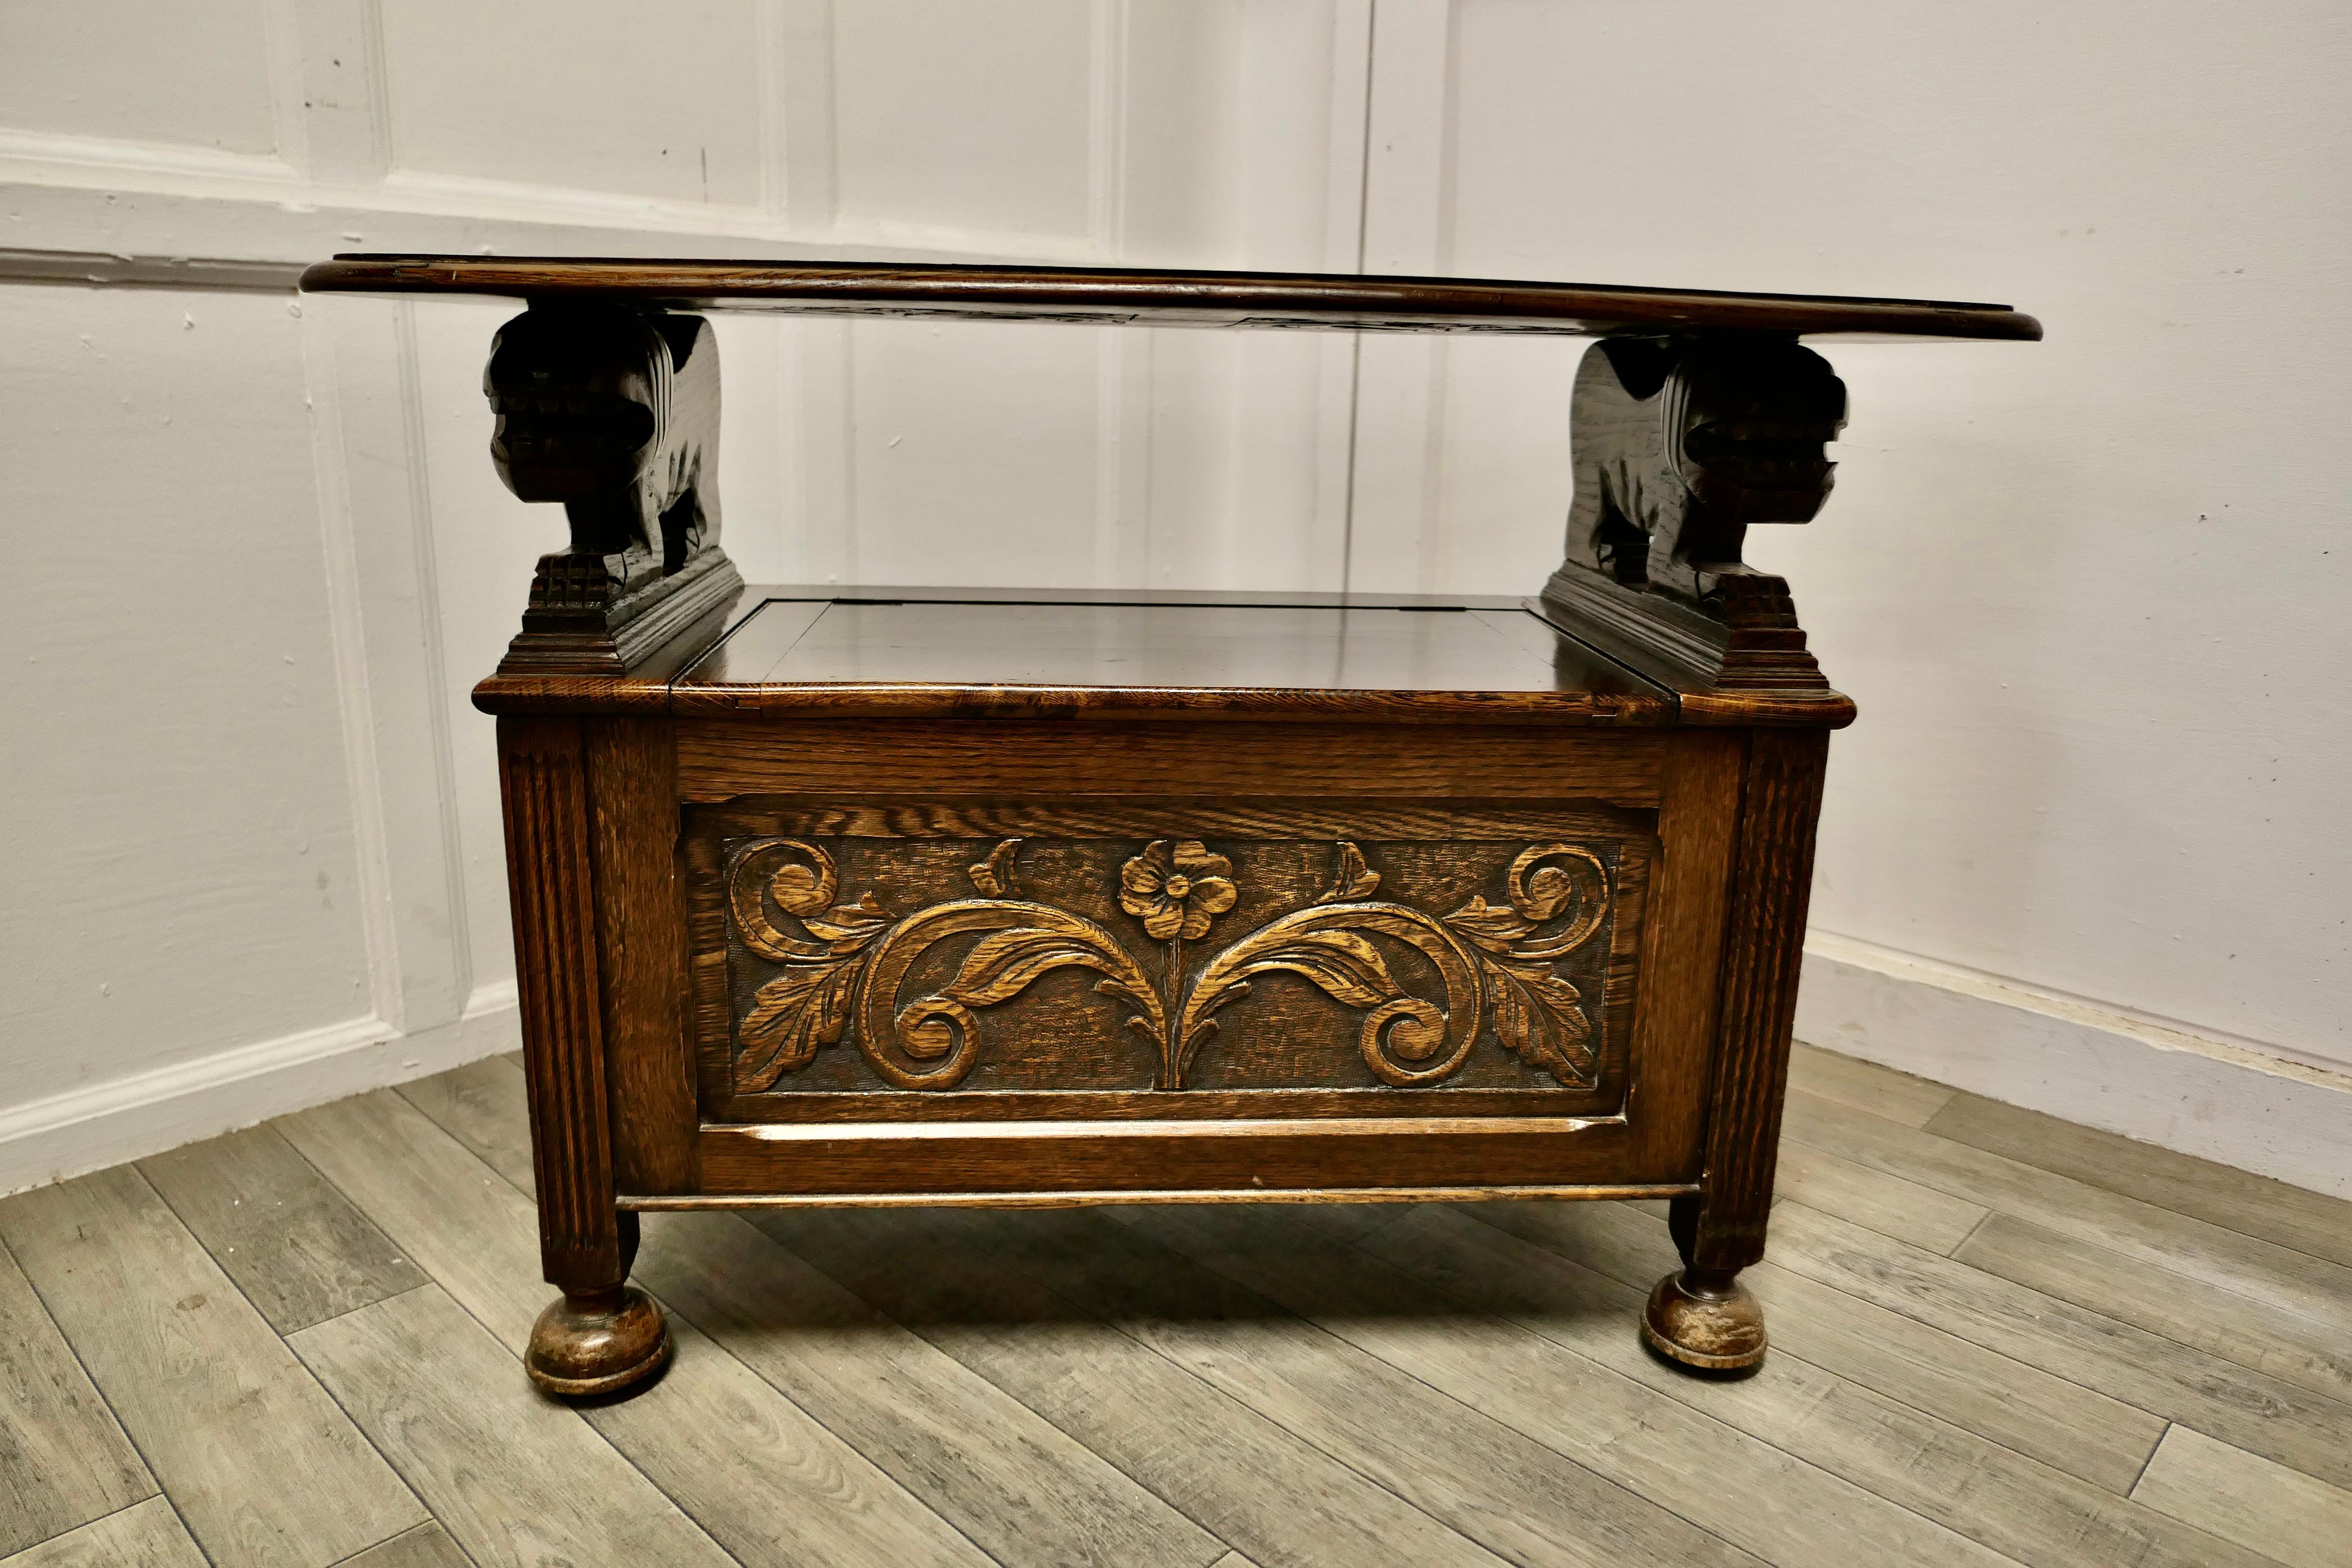 Arts & Crafts carved Oak Monks bench settle, hall table.

This useful piece is known as a Monks Bench, it is in fact a settle with a storage compartment inside the seat and the back of the bench can be pulled over, it then rests on the top of the